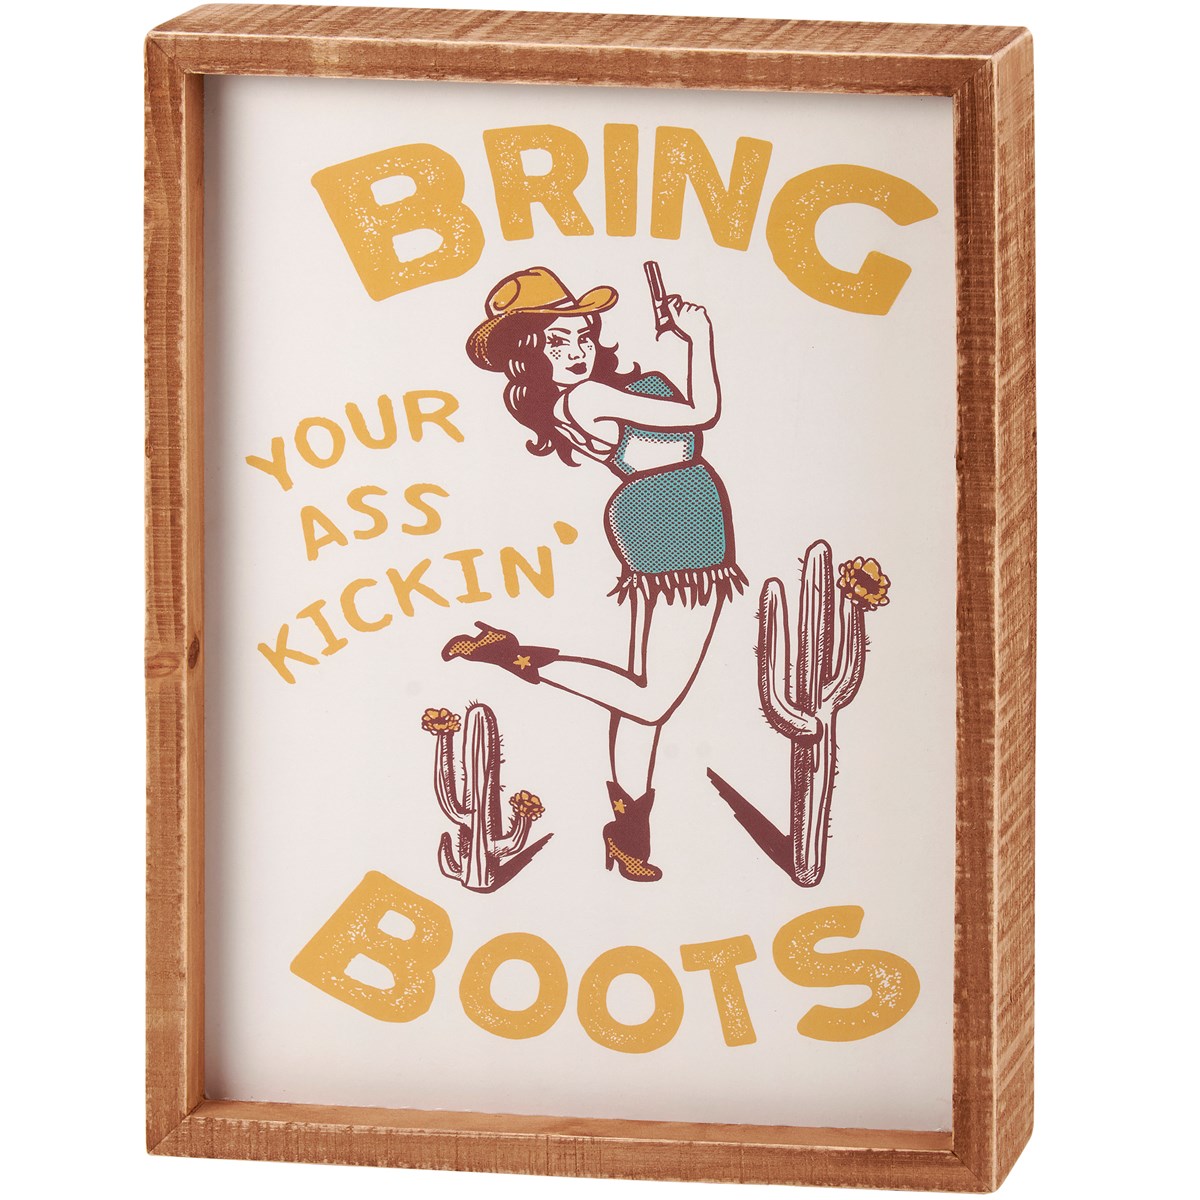 Boots Inset Box Sign - Wood, Paper